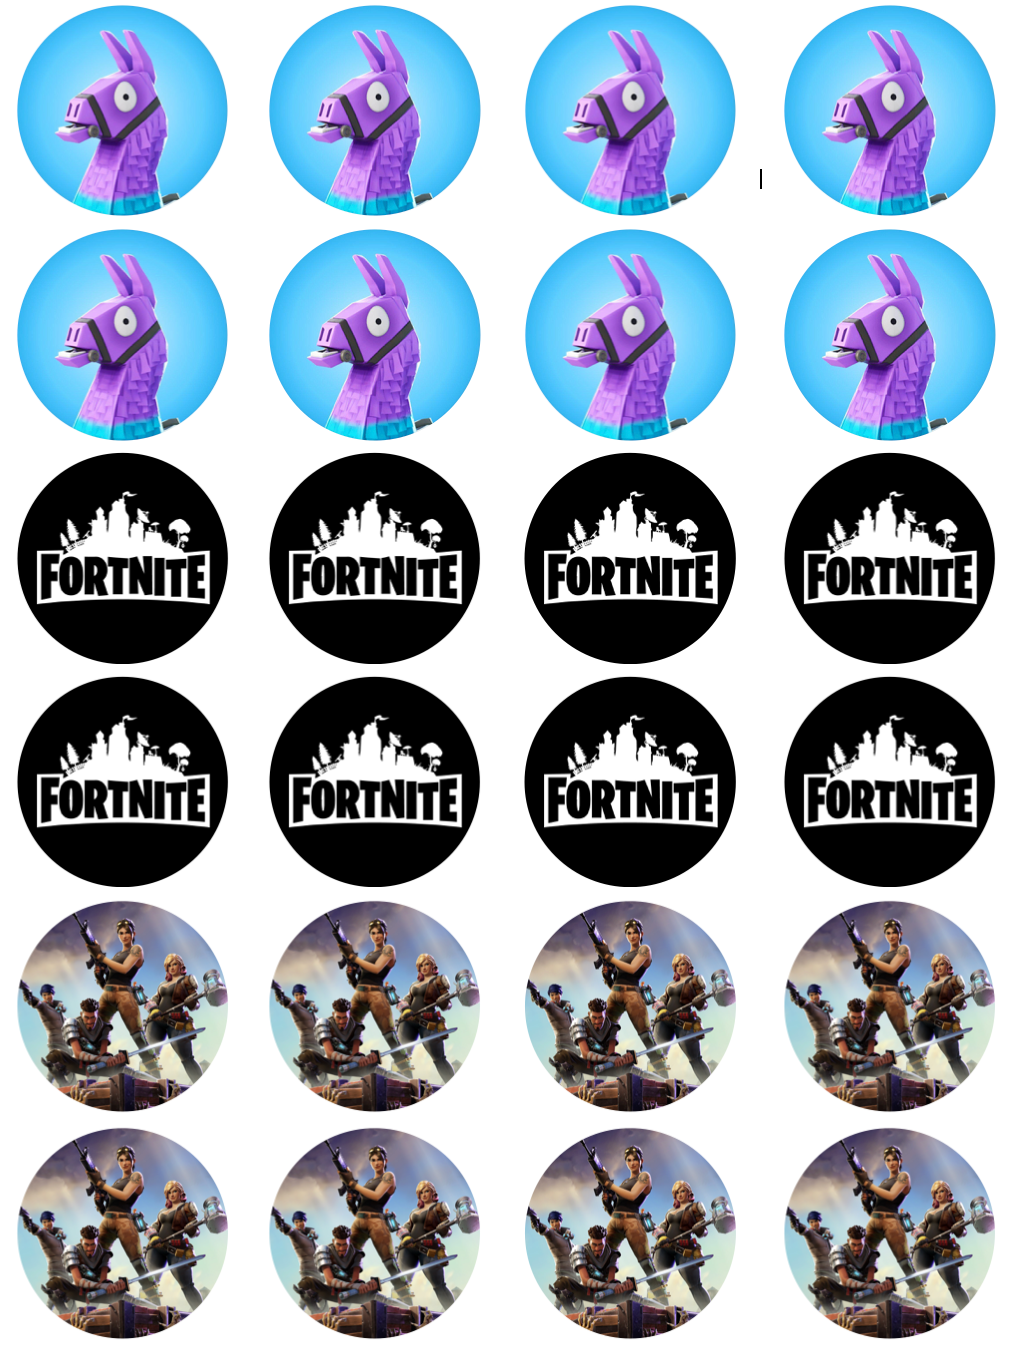 Fortnite #2 Cupcake Edible Icing Image Toppers